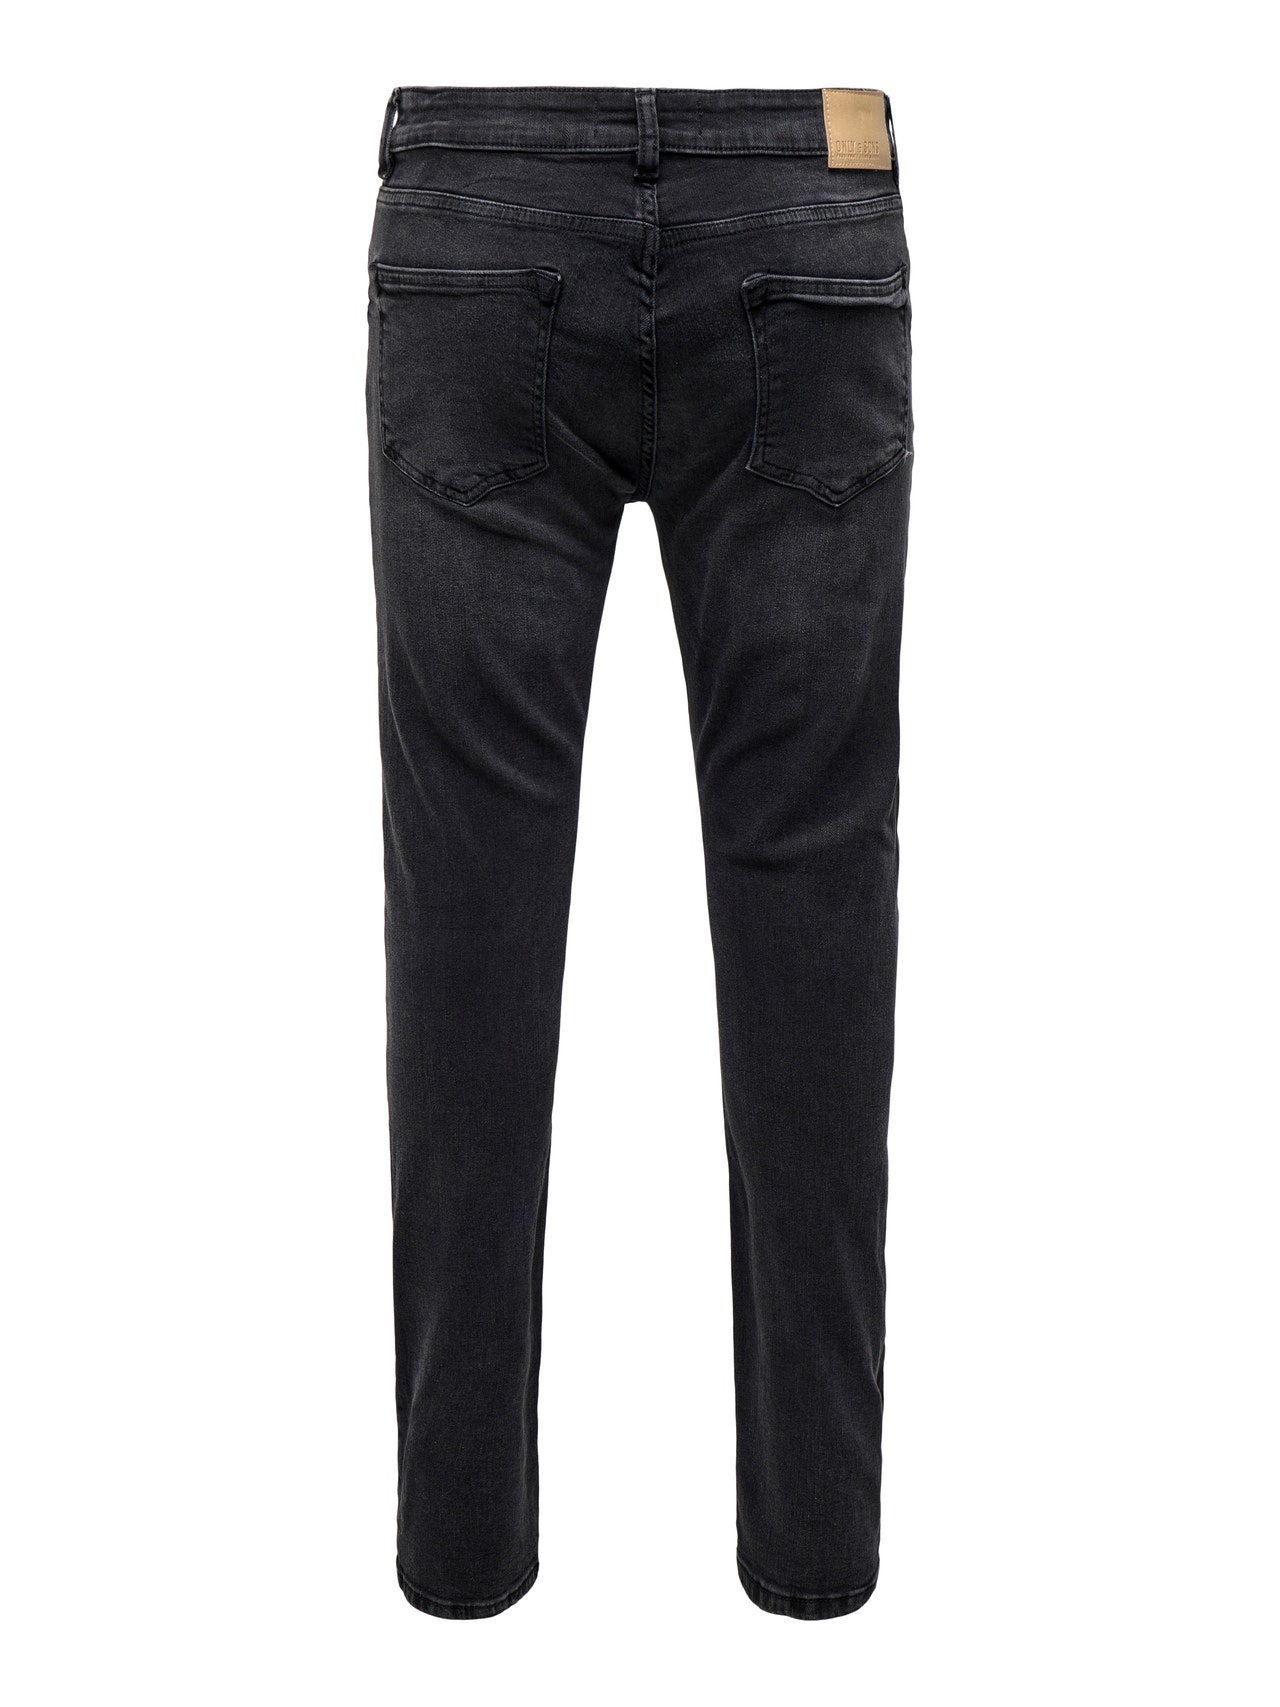 ONLY & SONS ONSWARP SKINNY WB 9095 DCC DNM NOOS -Washed Black - 22029095